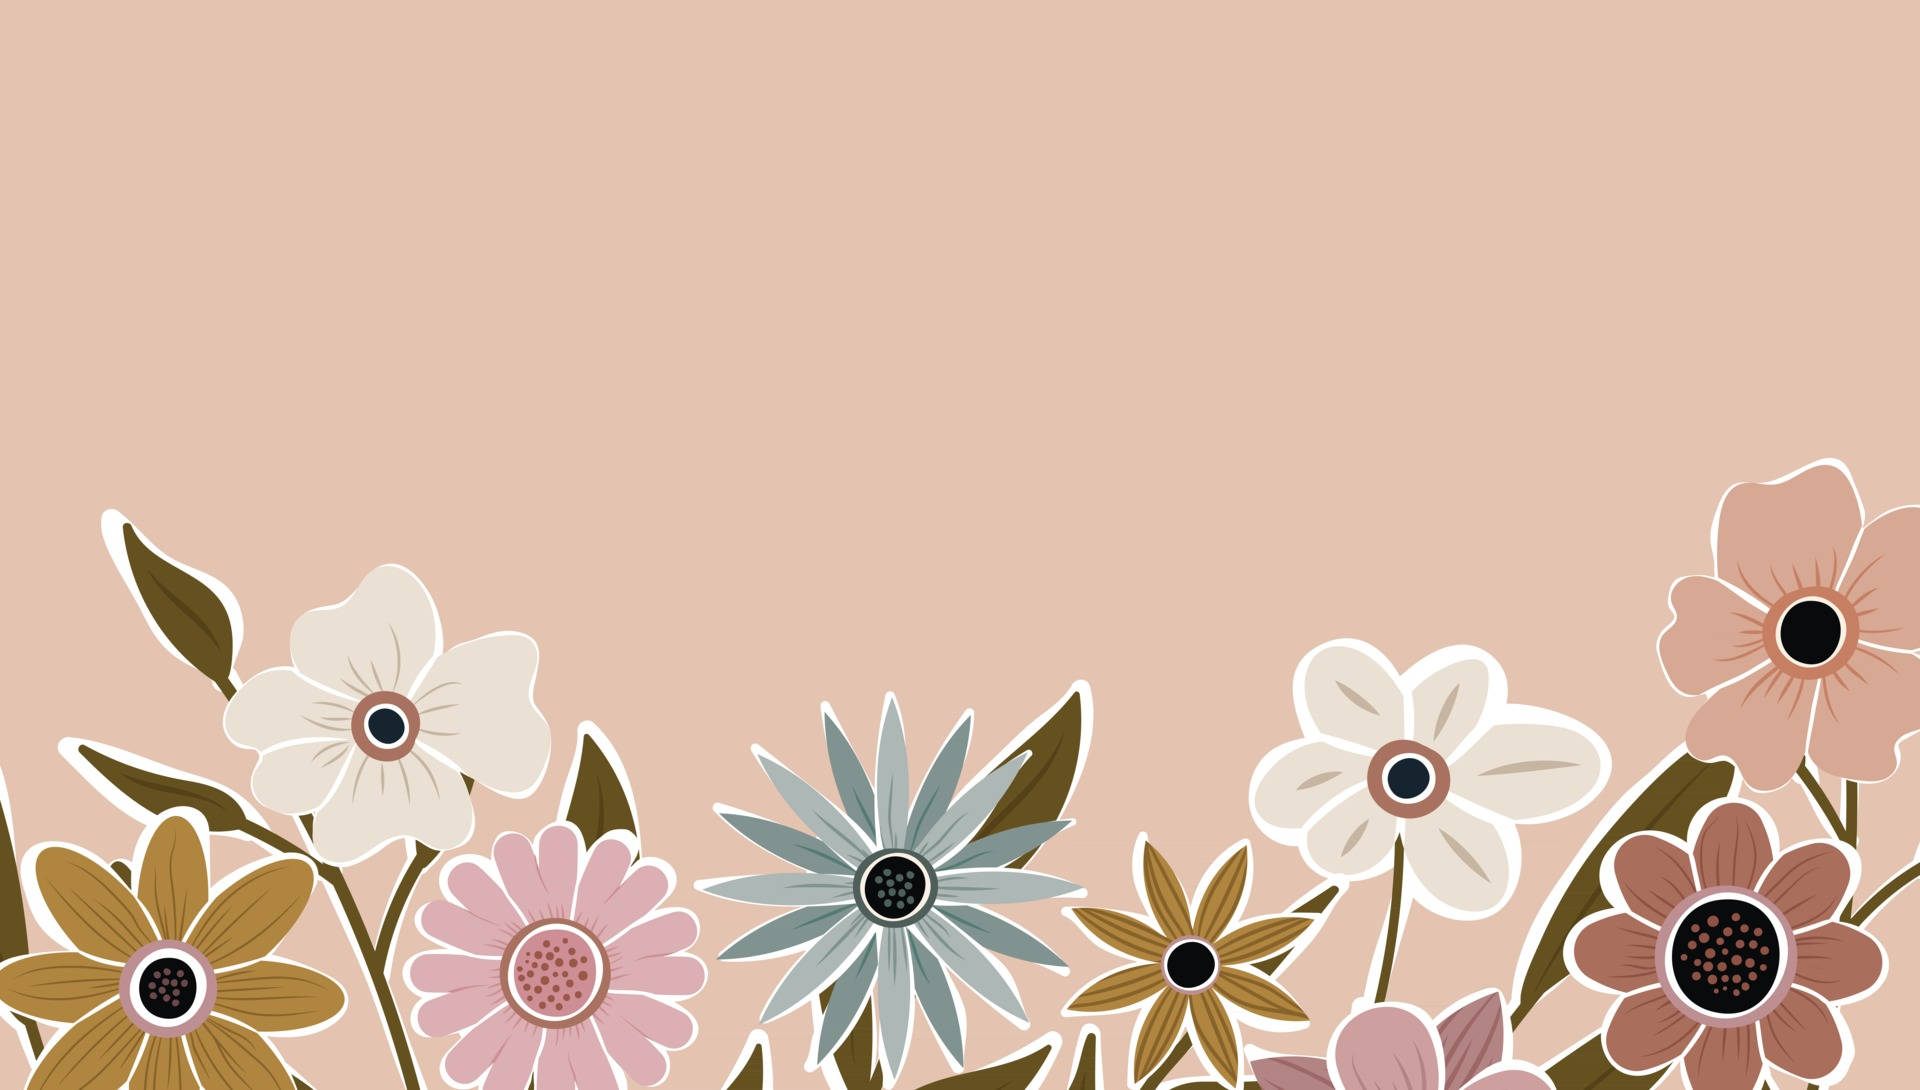 Digitally See the Beauty of Nature with a Minimalist Flower Computer Wallpaper